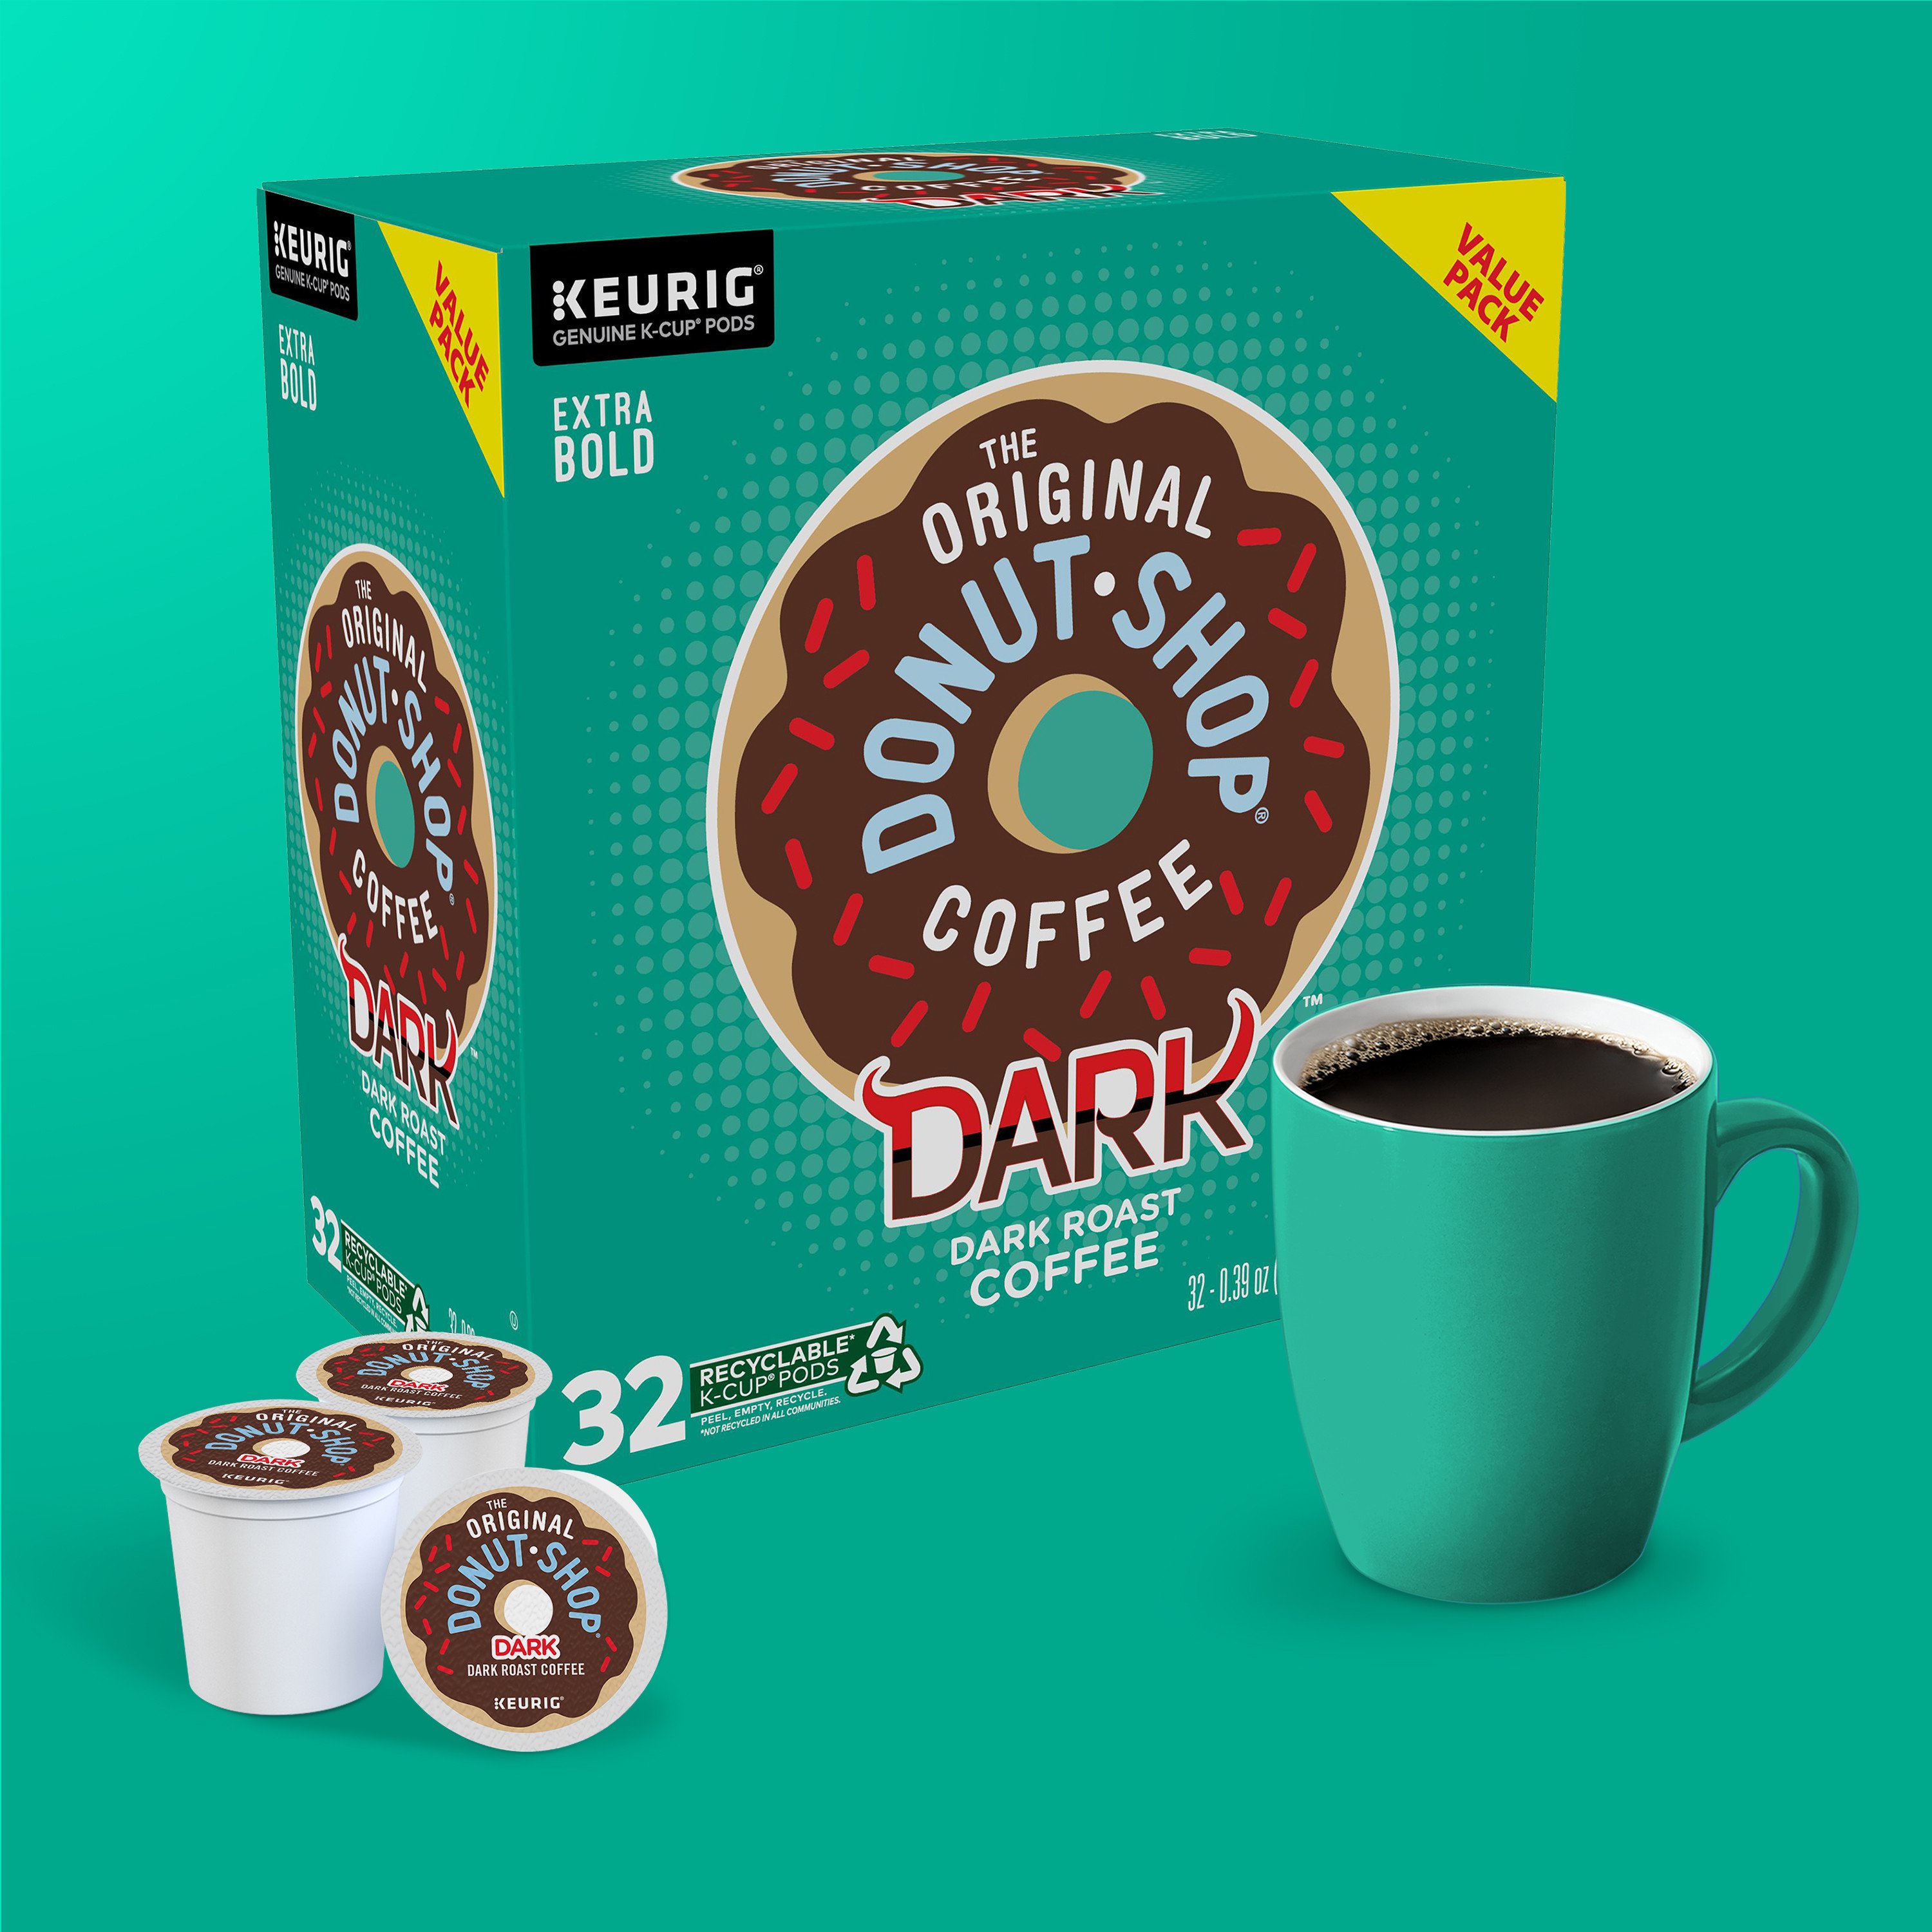 Dunkin' Donuts Cold Brew Single Serve Coffee K Cups - Shop Coffee at H-E-B